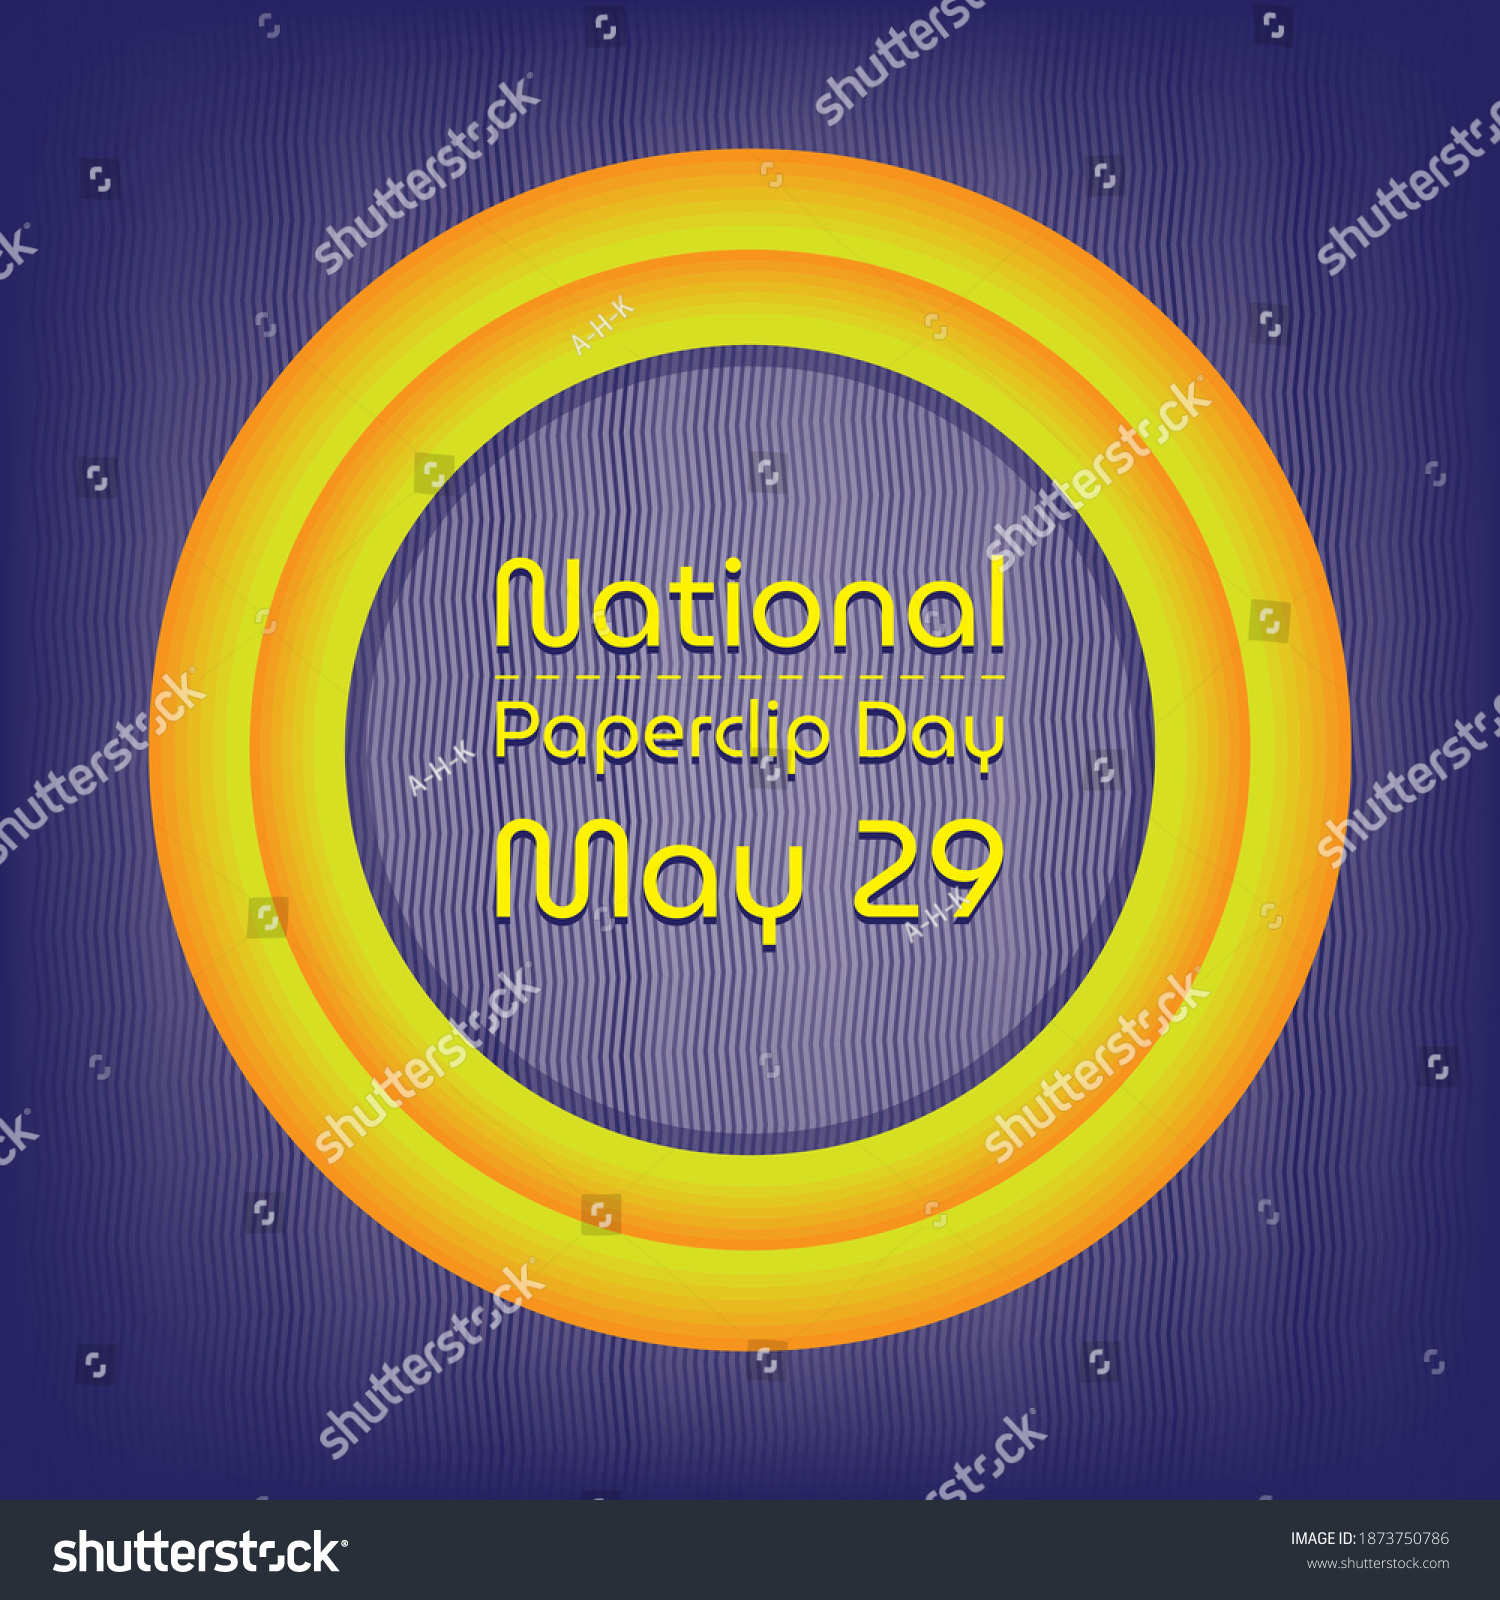 SVG of Vector illustration on the theme of National Paperclip Day svg